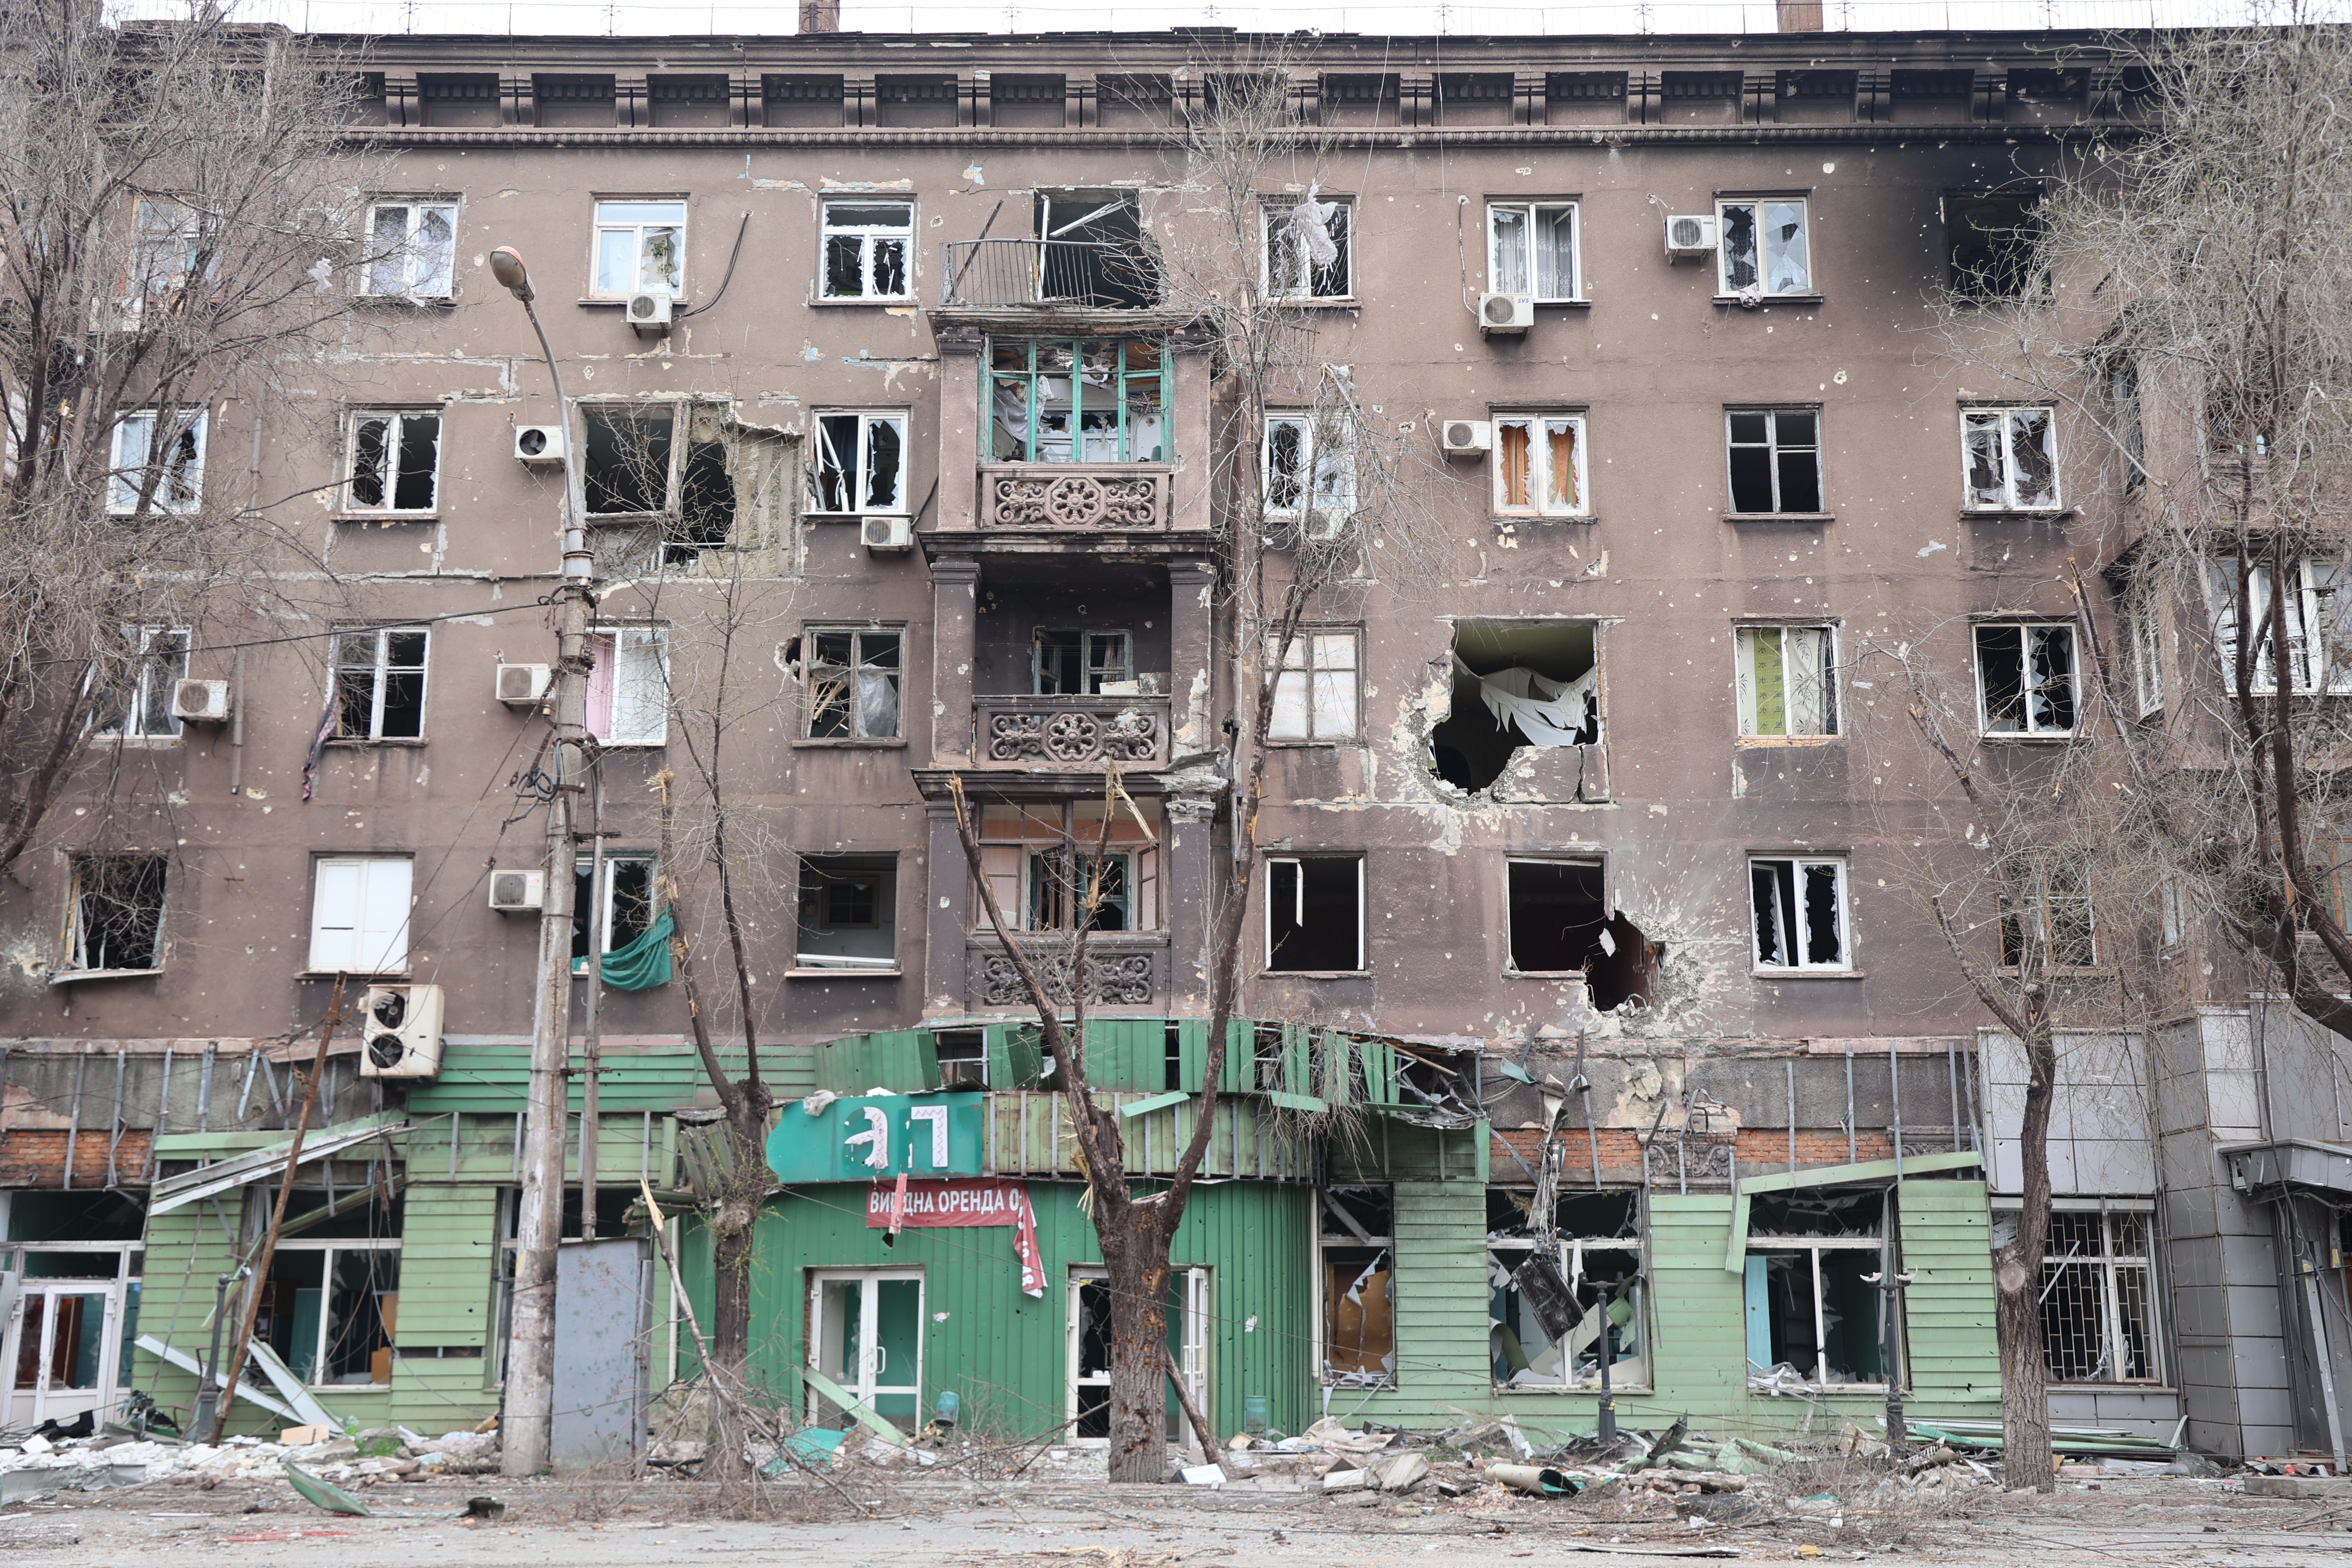 A view of damaged buildings in the Ukrainian city of Mariupol under the control of Russian military and pro-Russian separatists, on April 17.